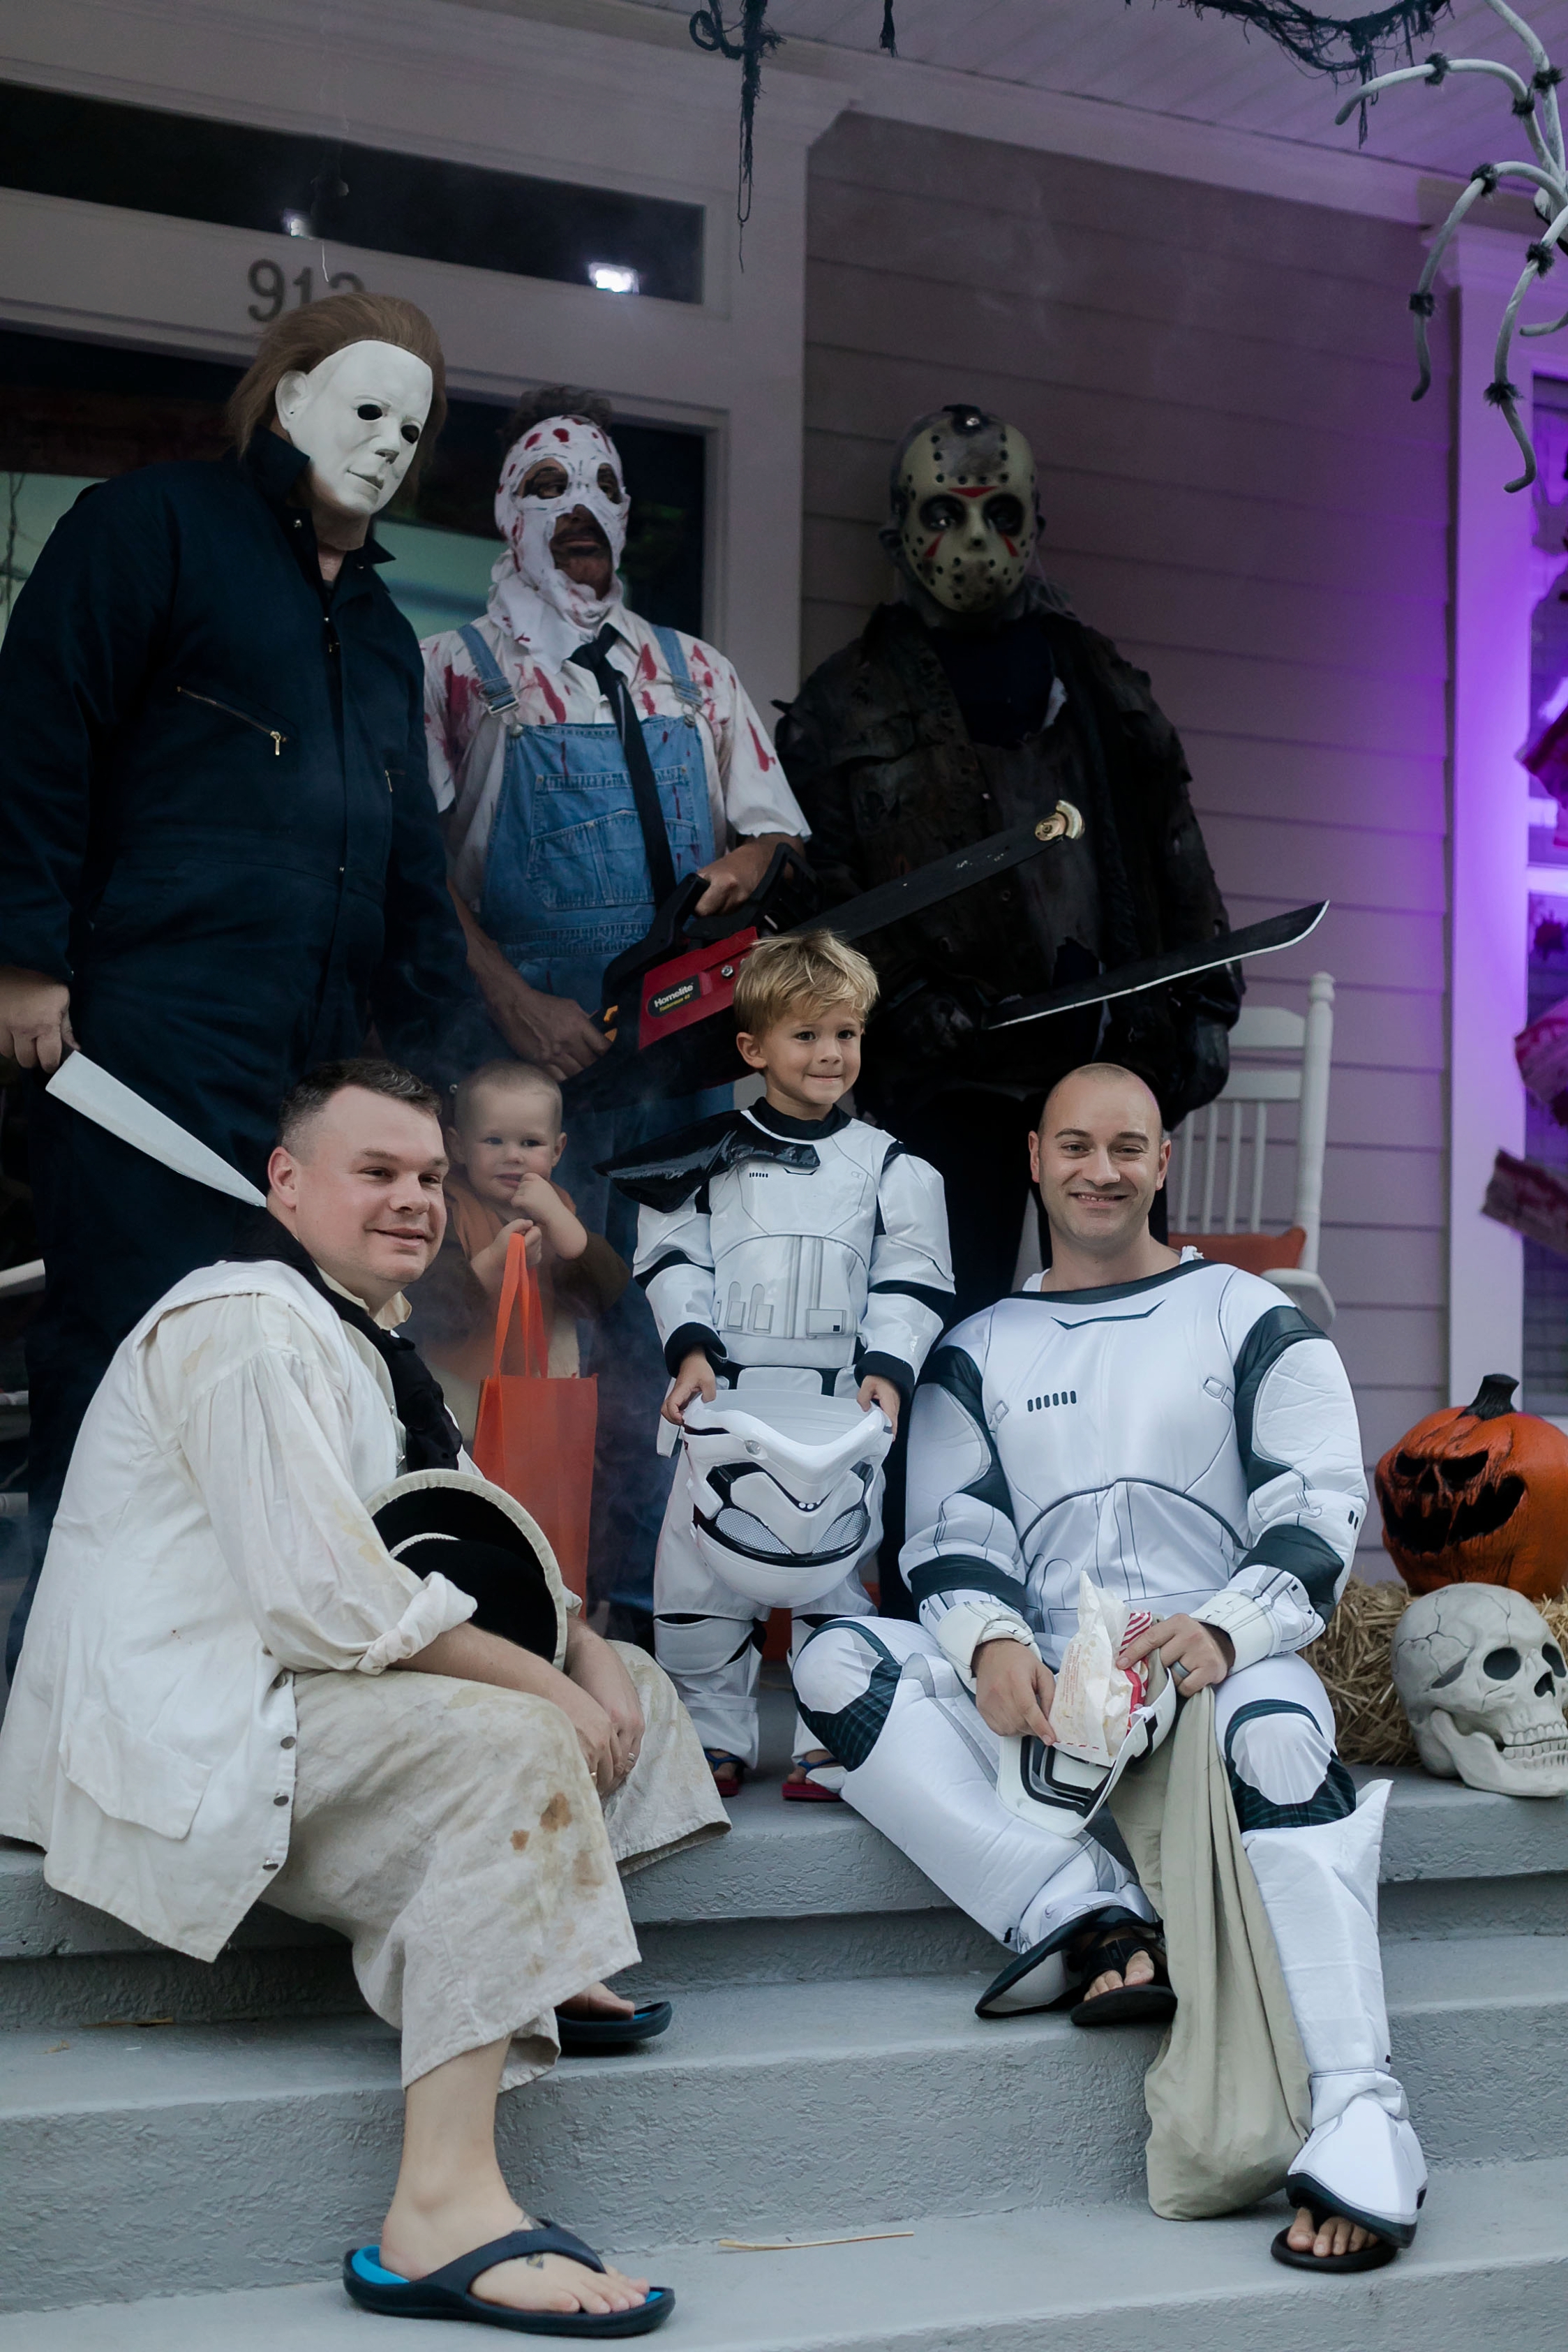 The Force comes out on Halloween, Orlando Children and Family Photographer Brooke Tucker